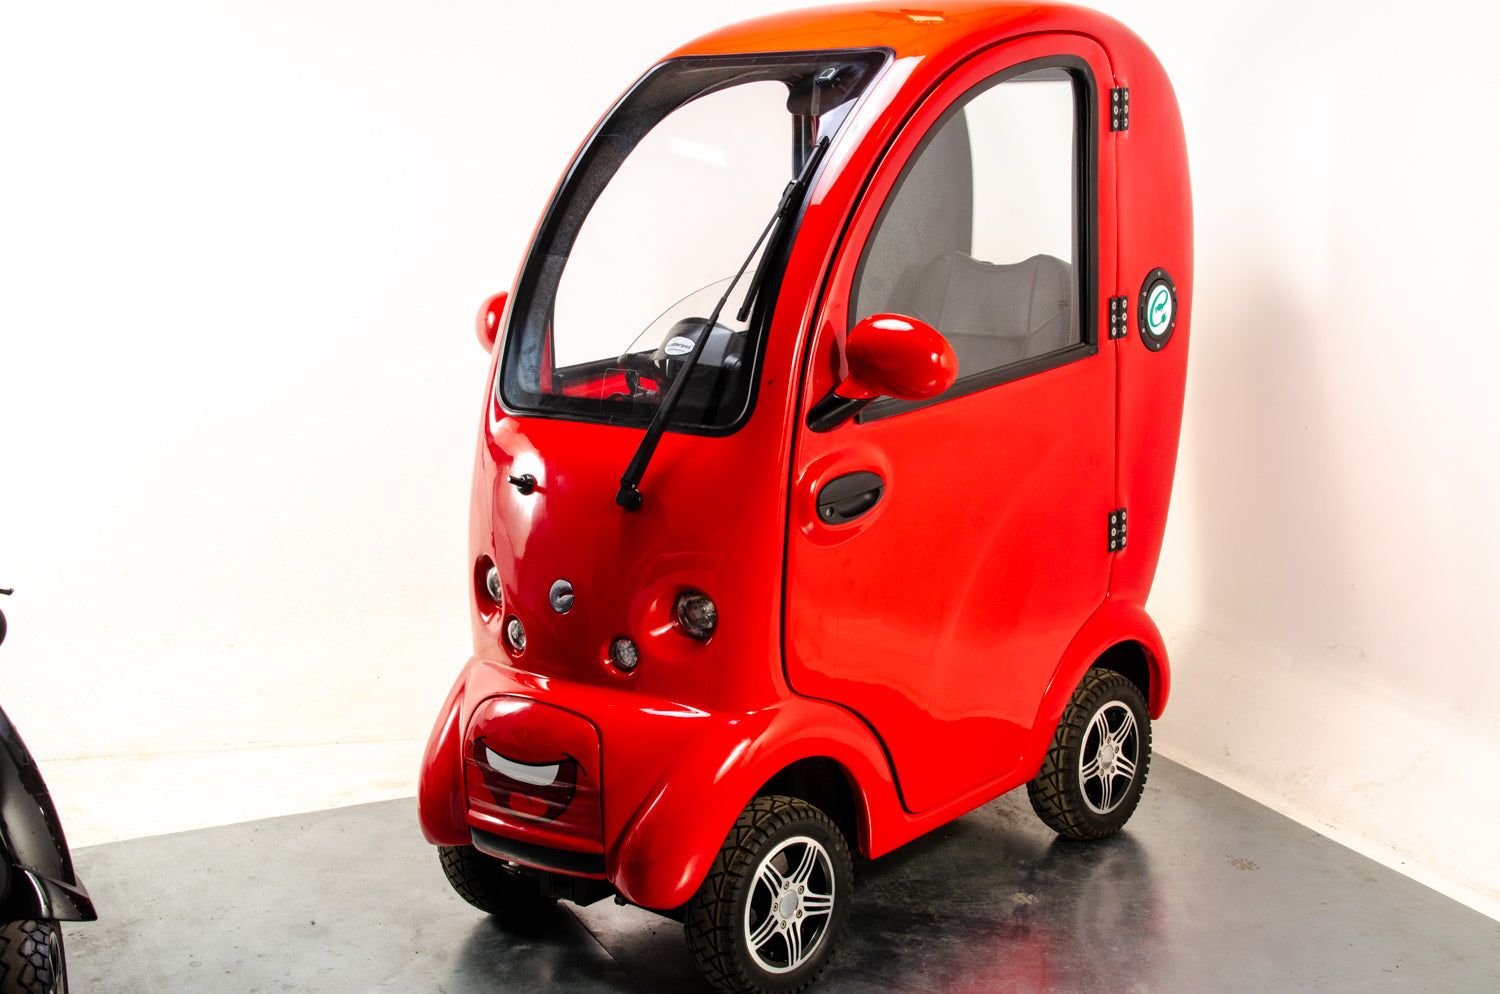 Scooterpac CabinCar MK2 8mph Used Mobility Scooter Enclosed Cabin Car Electric Road Legal Red